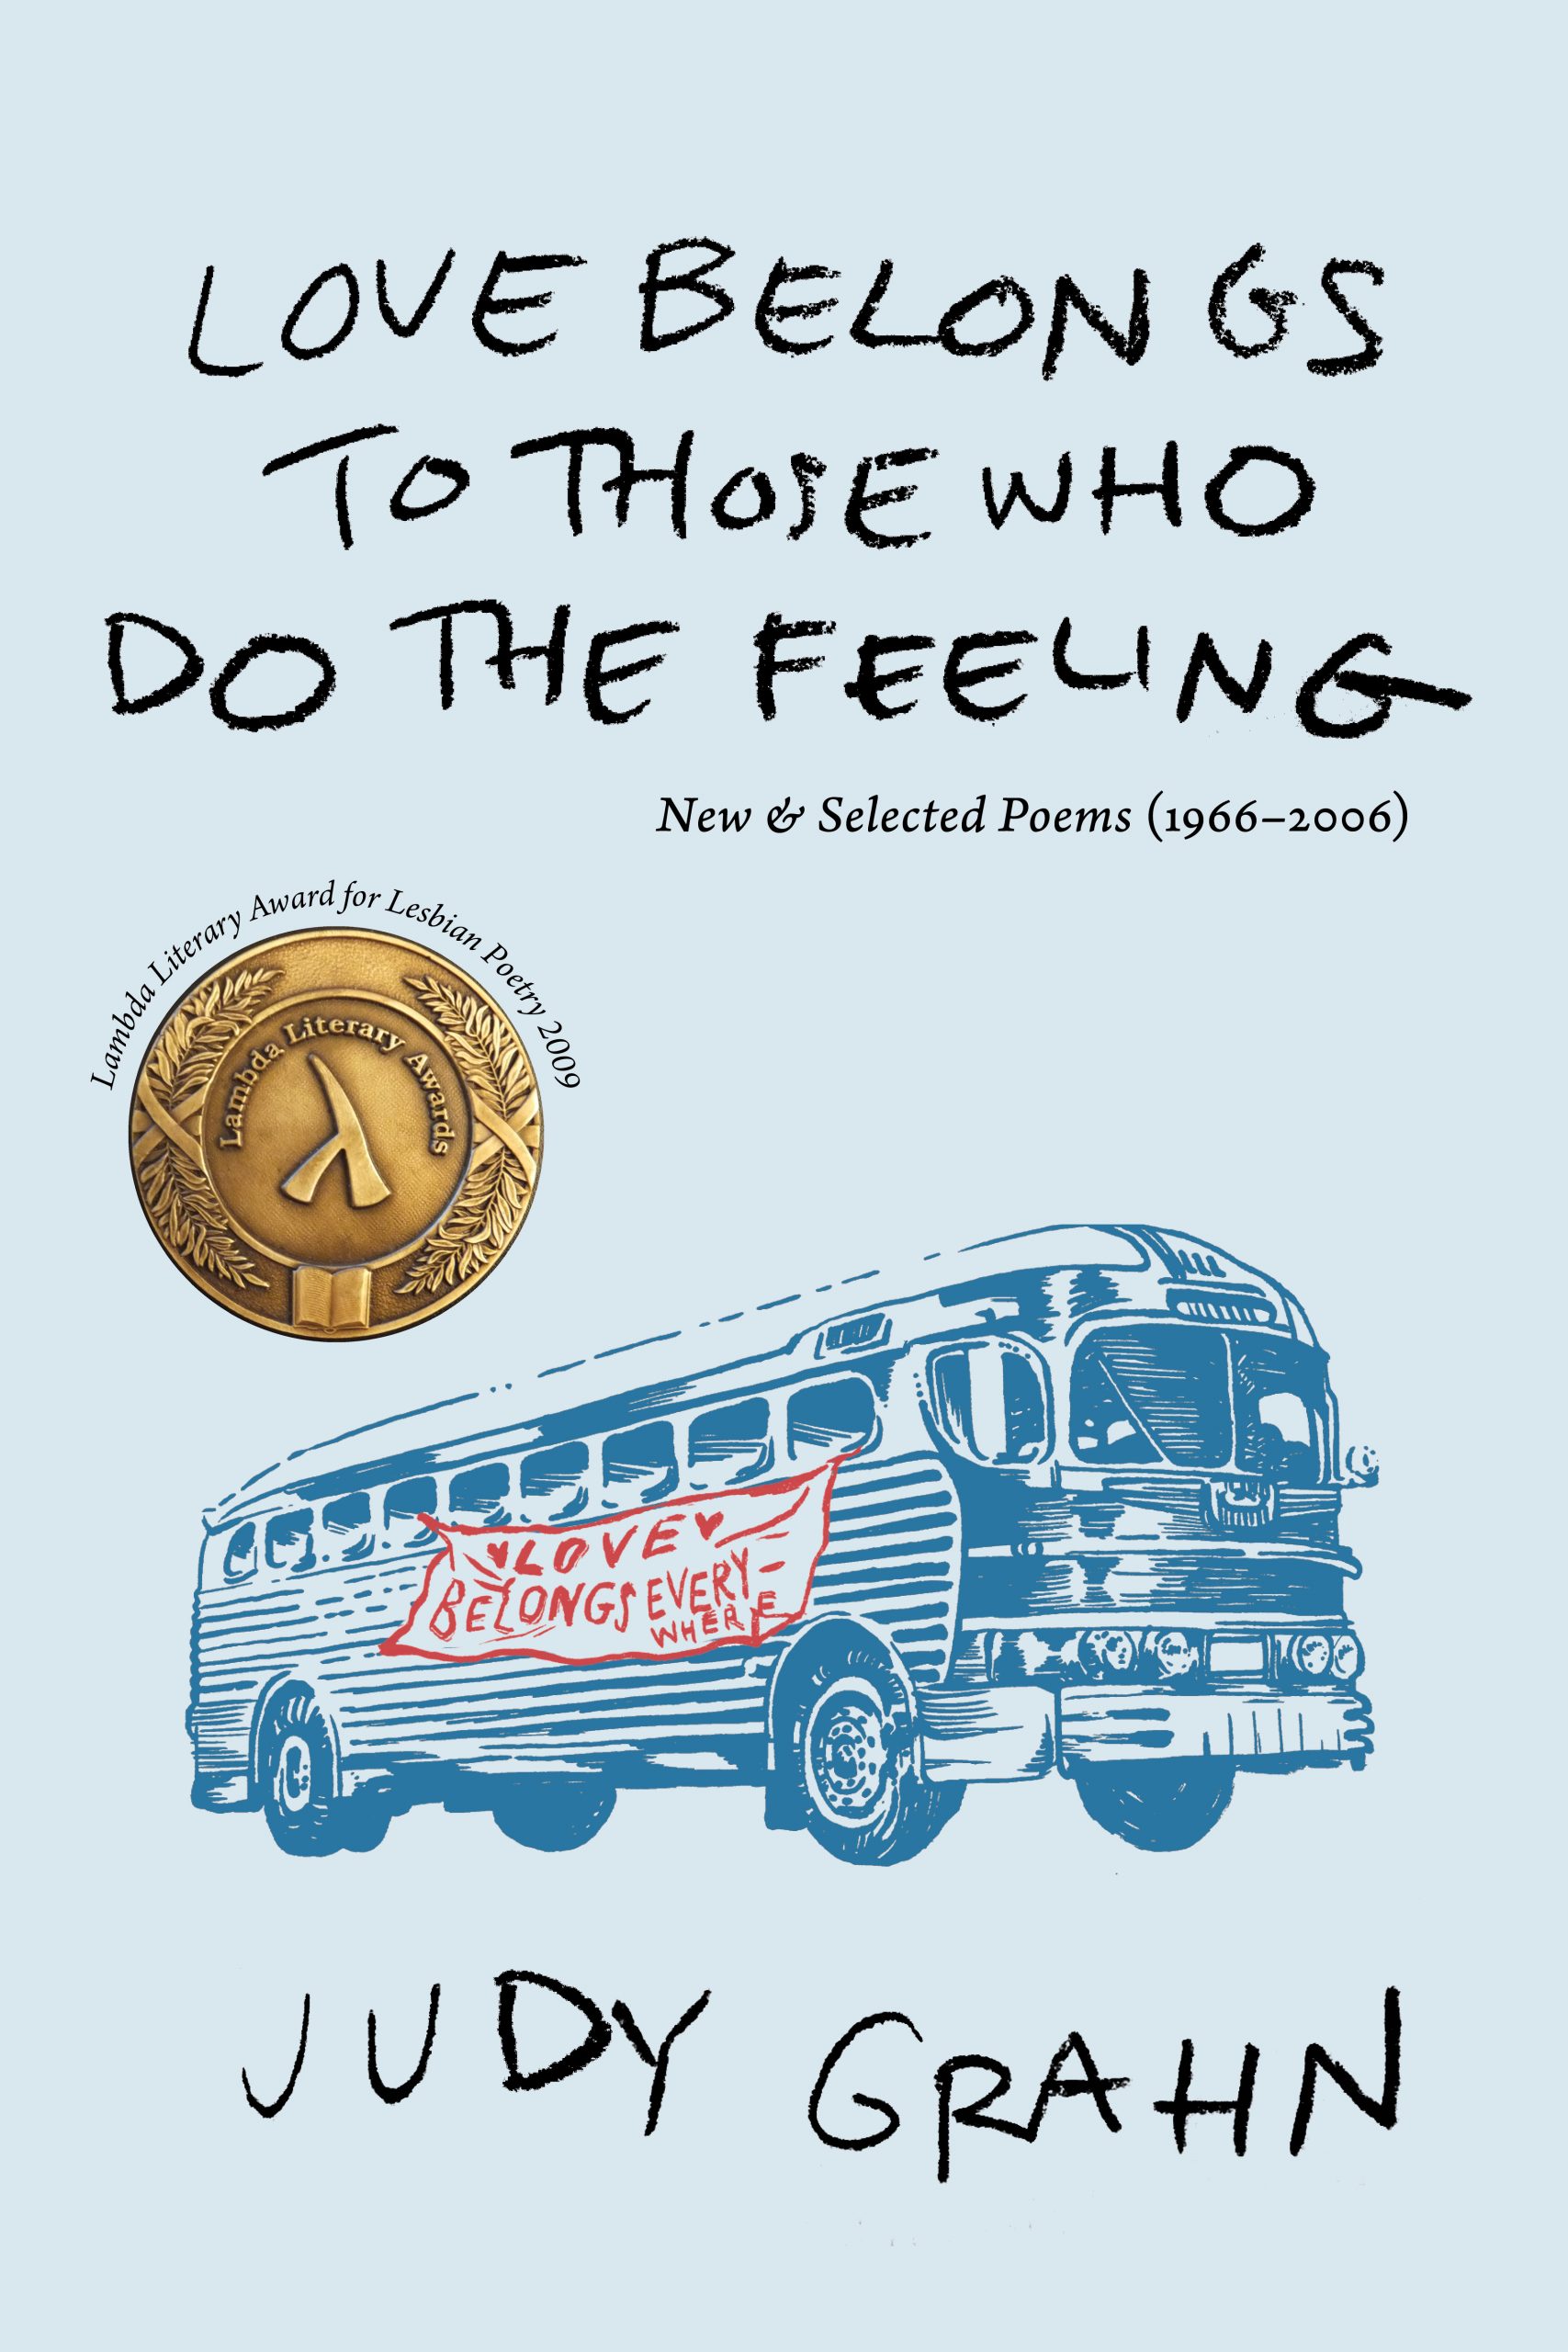 Black text stating Love Belongs to Those Who Do the Feeling New & Selected Poems (1966-2006) by Judy Grahn over a blue background with a blue illustration of a bus that has a red banner stating Love Belongs Everywhere on it and a gold Lambda Literary Award for Lesbian Poetry 2009 seal.